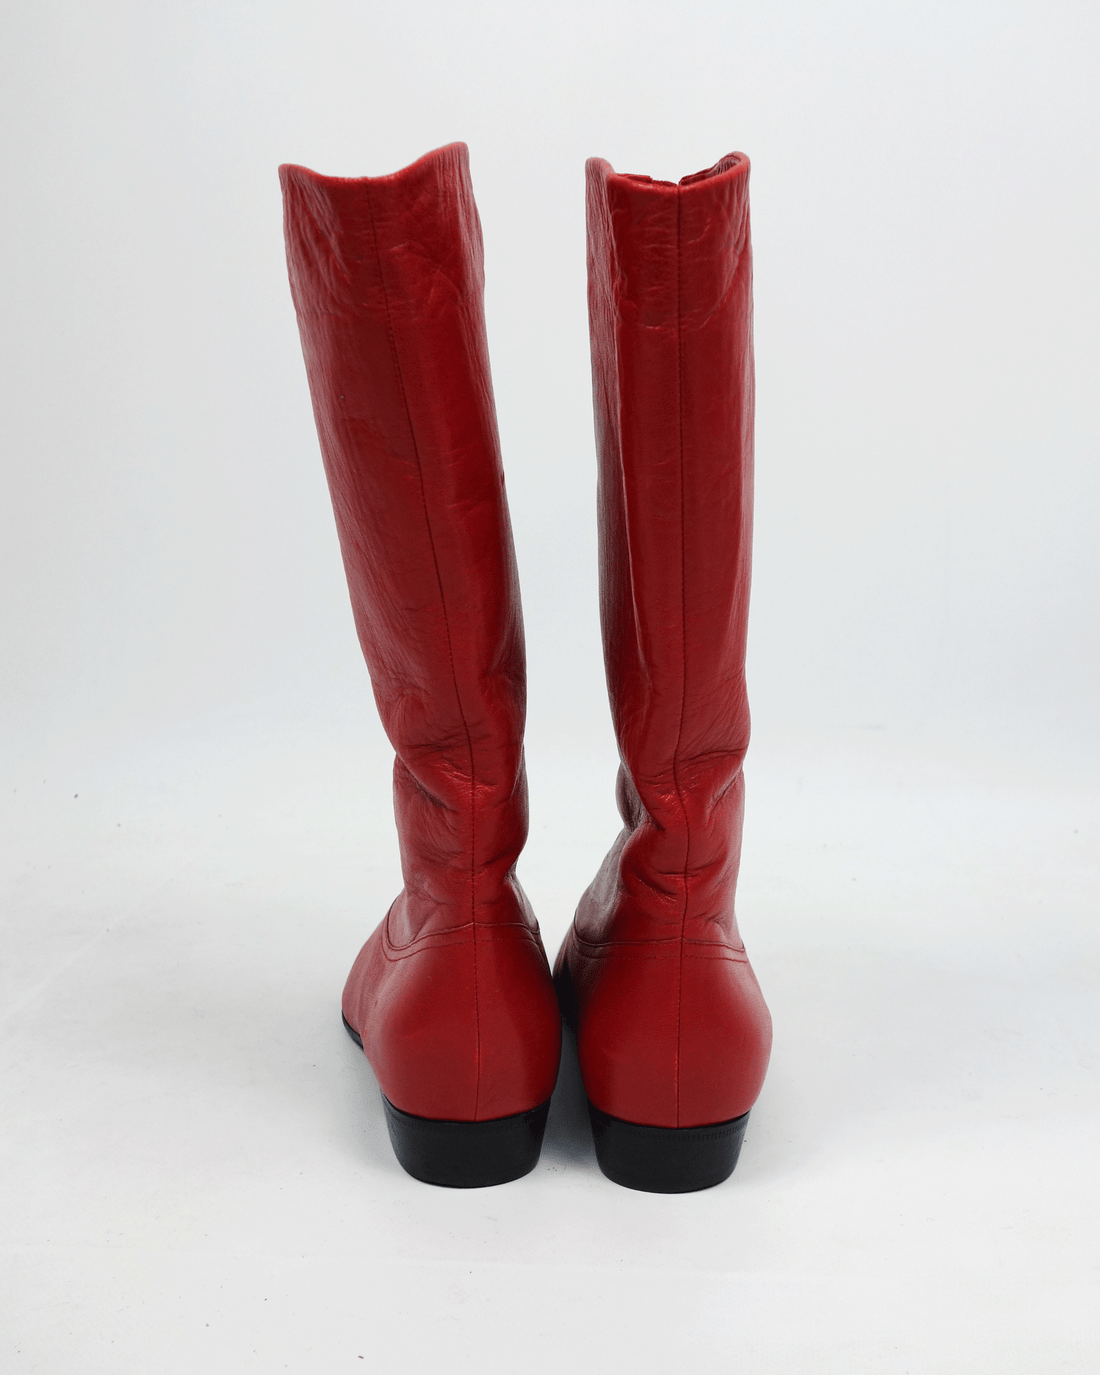 Marc Jacobs Zipped Red Leather Boots 2000's